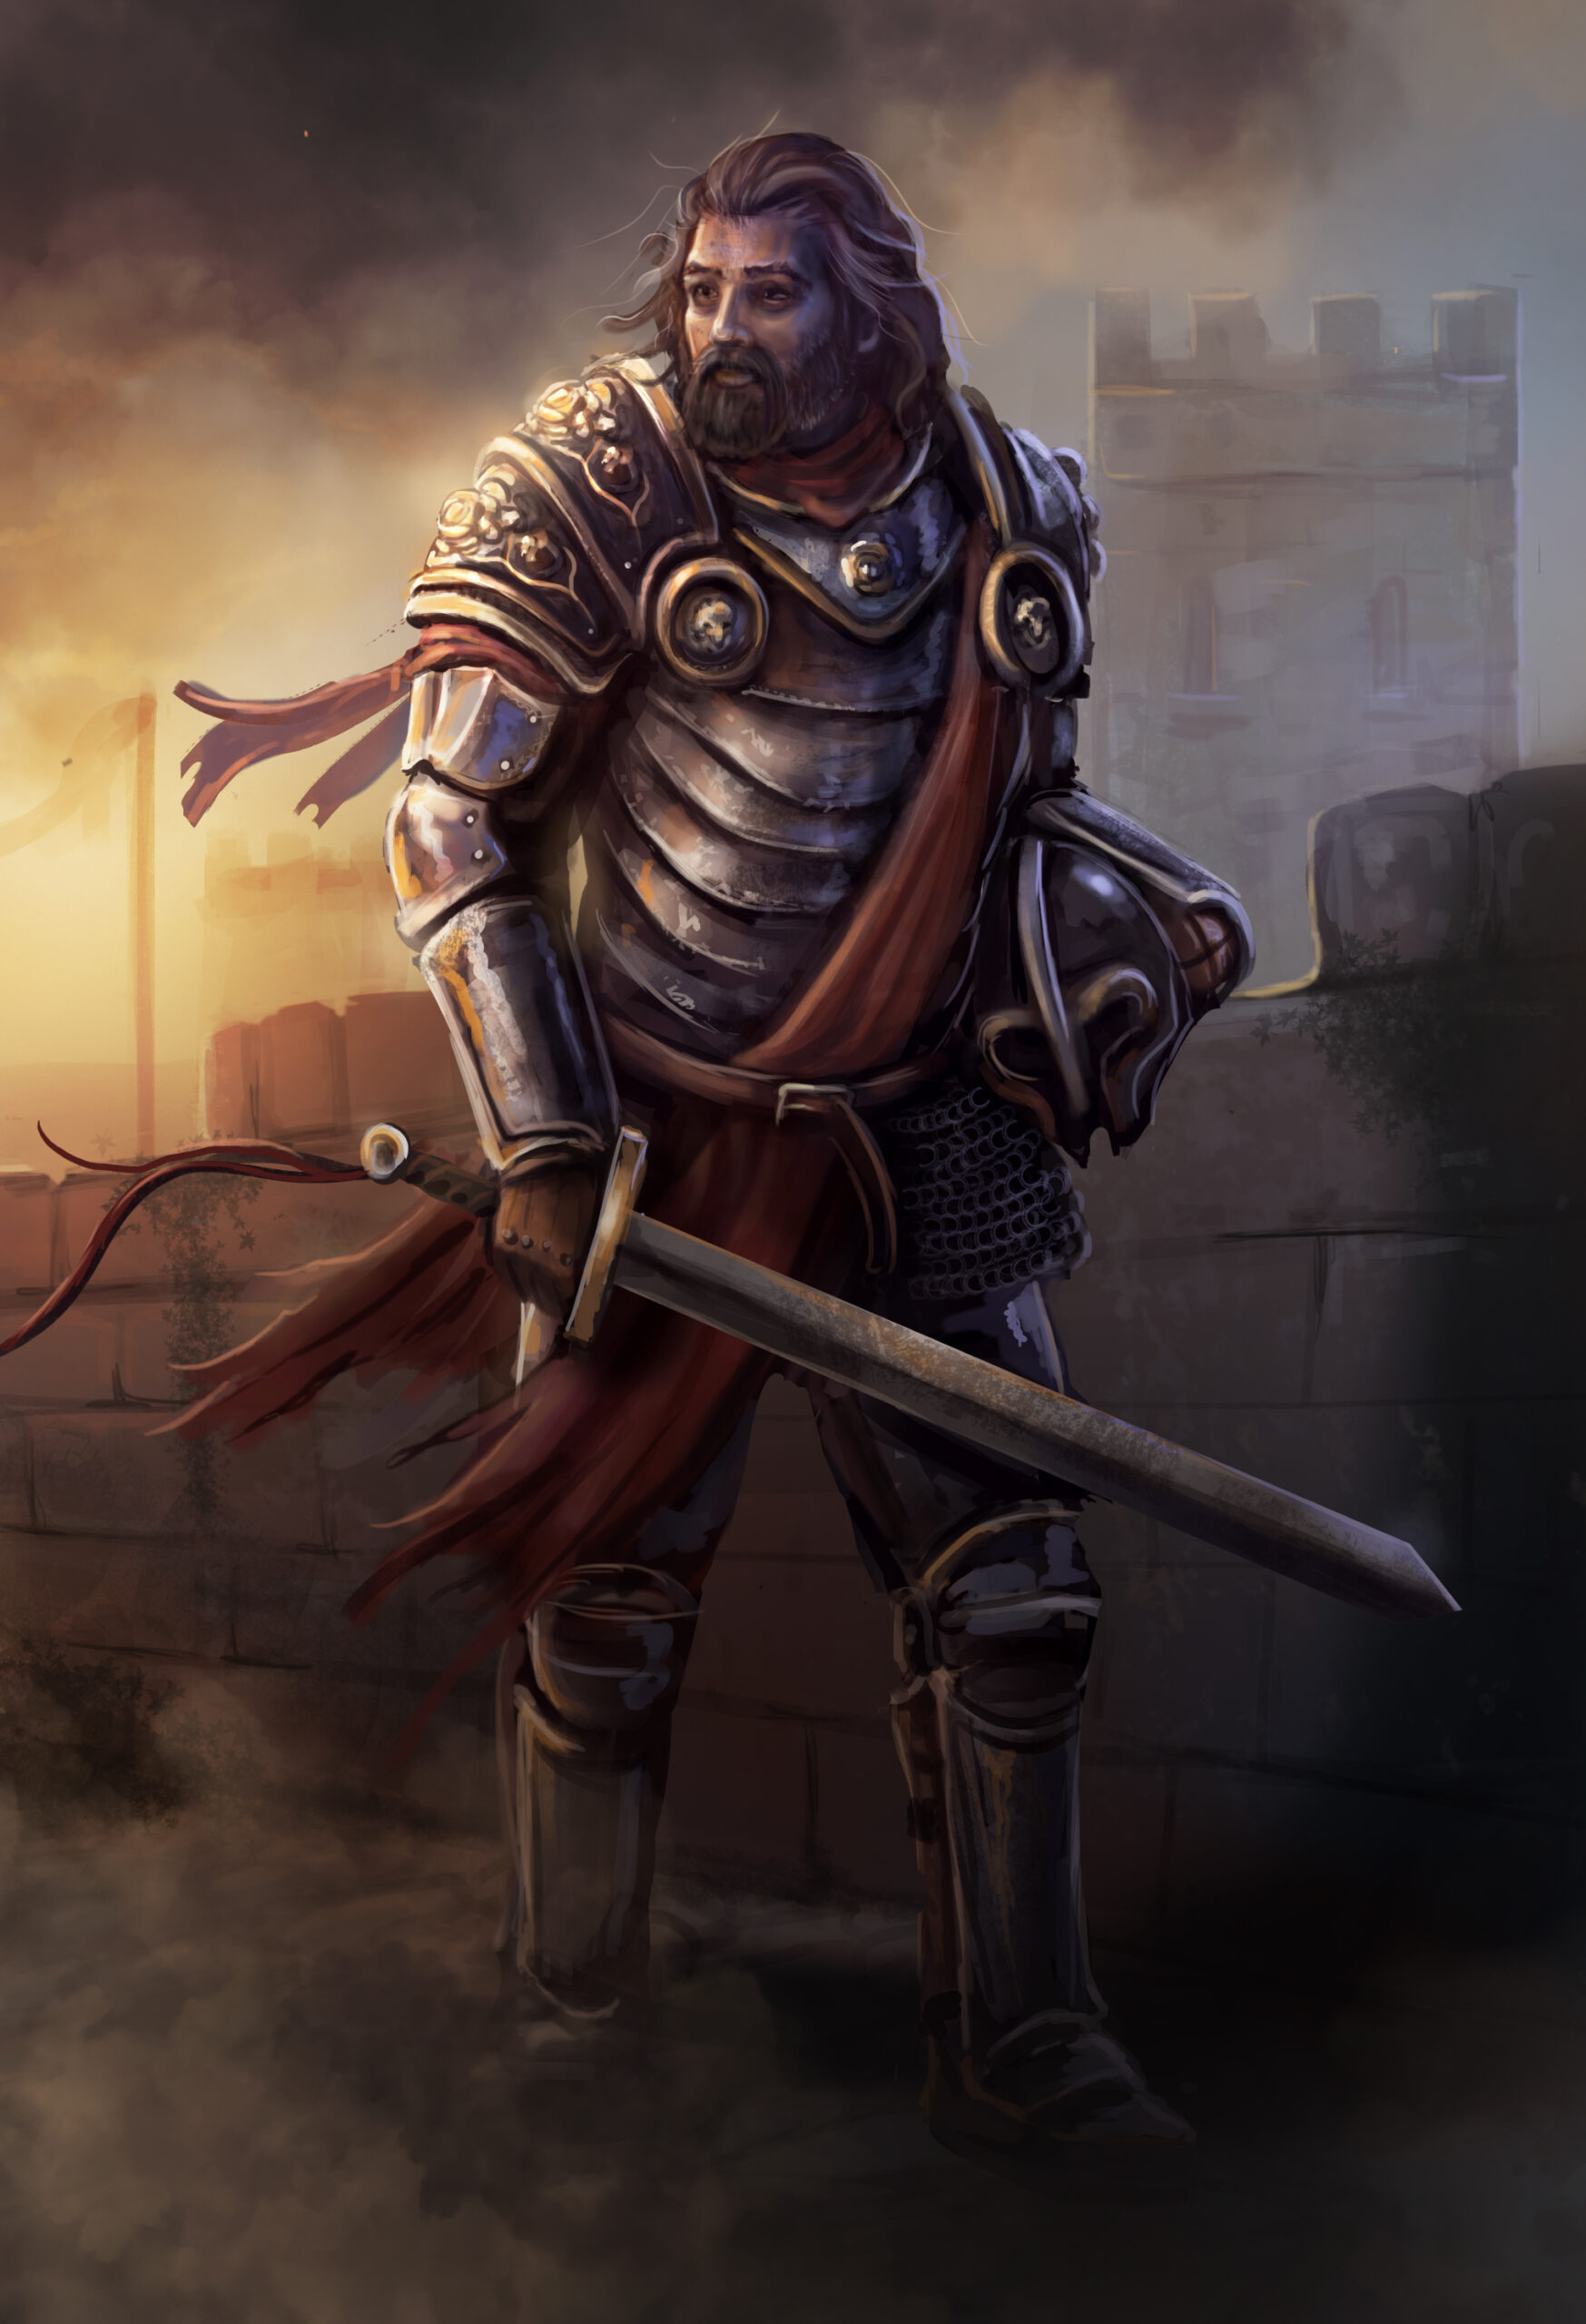 A fantasy knight from arthurian legend. Sir Bedivere.